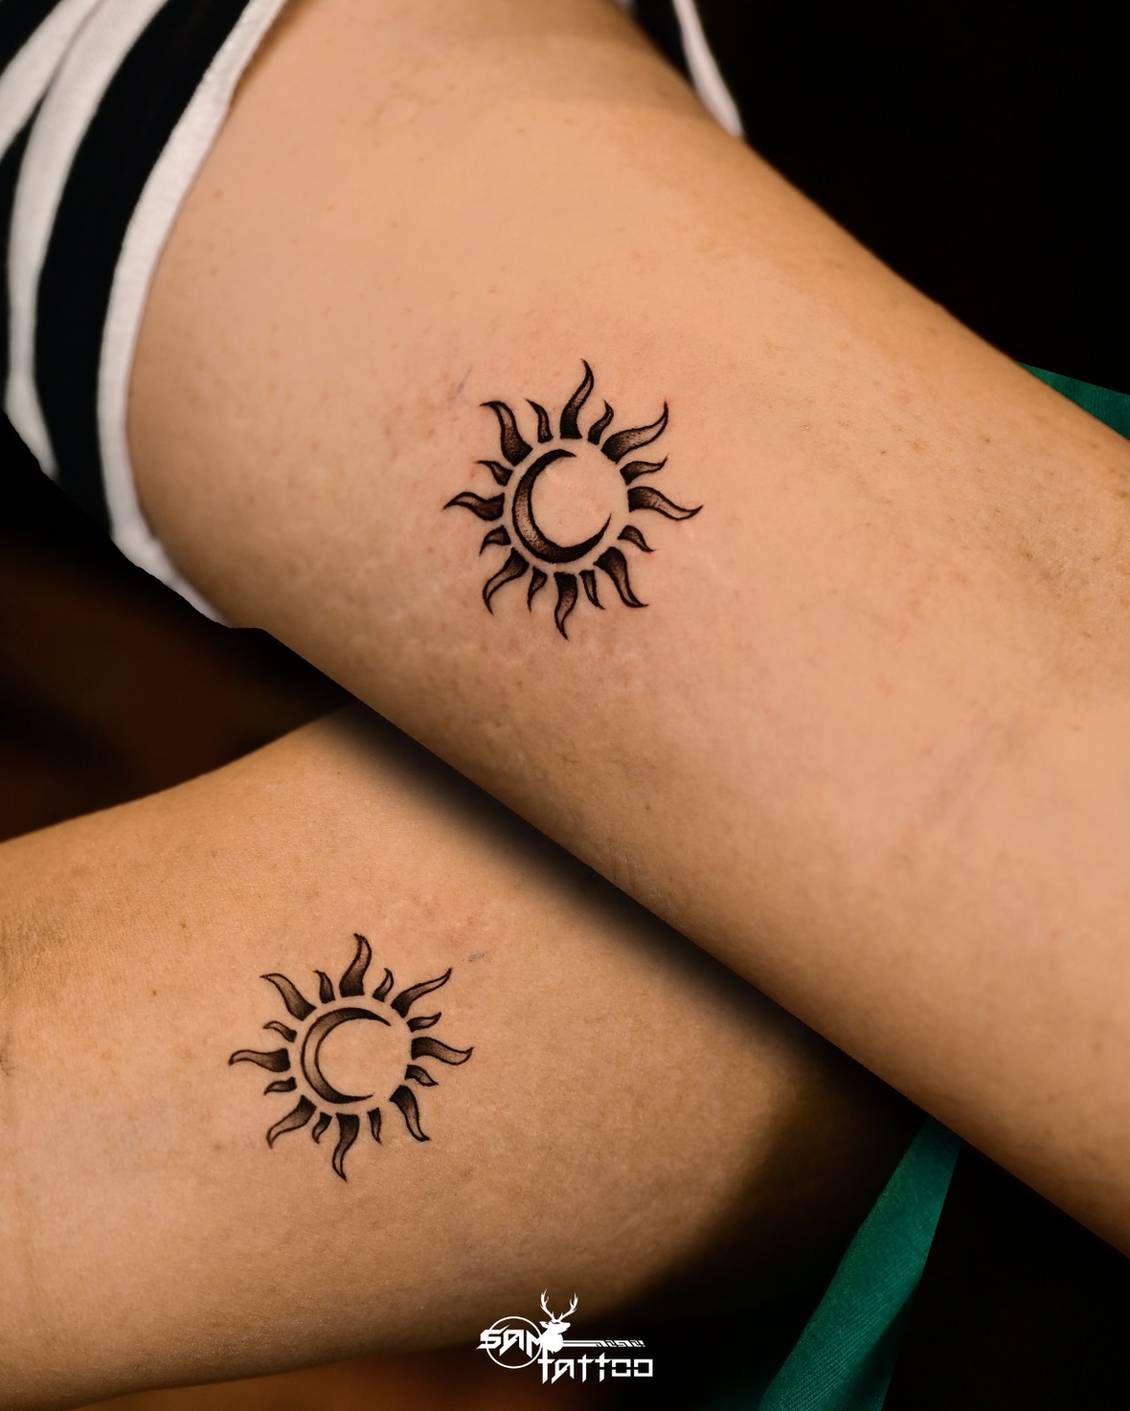 Cutest Minimalist Space-themed Tattoo Designs | Preview.ph